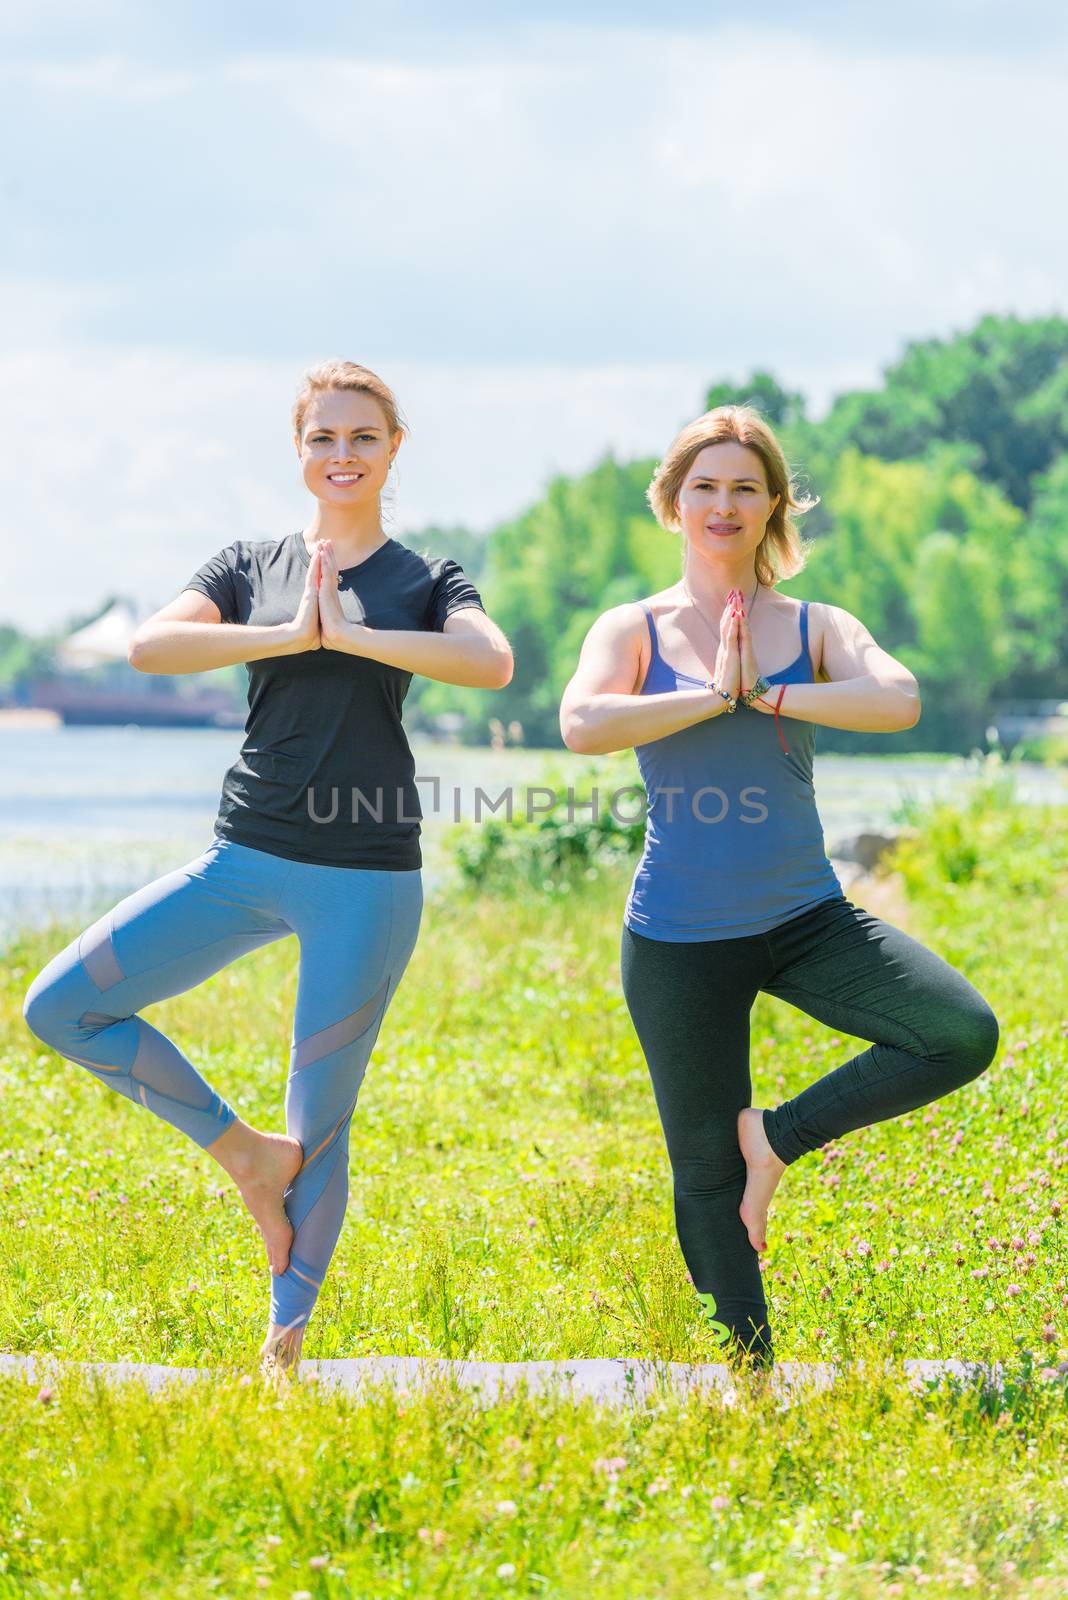 yoga classes with an individual trainer, balance on one leg on a sunny day in the park